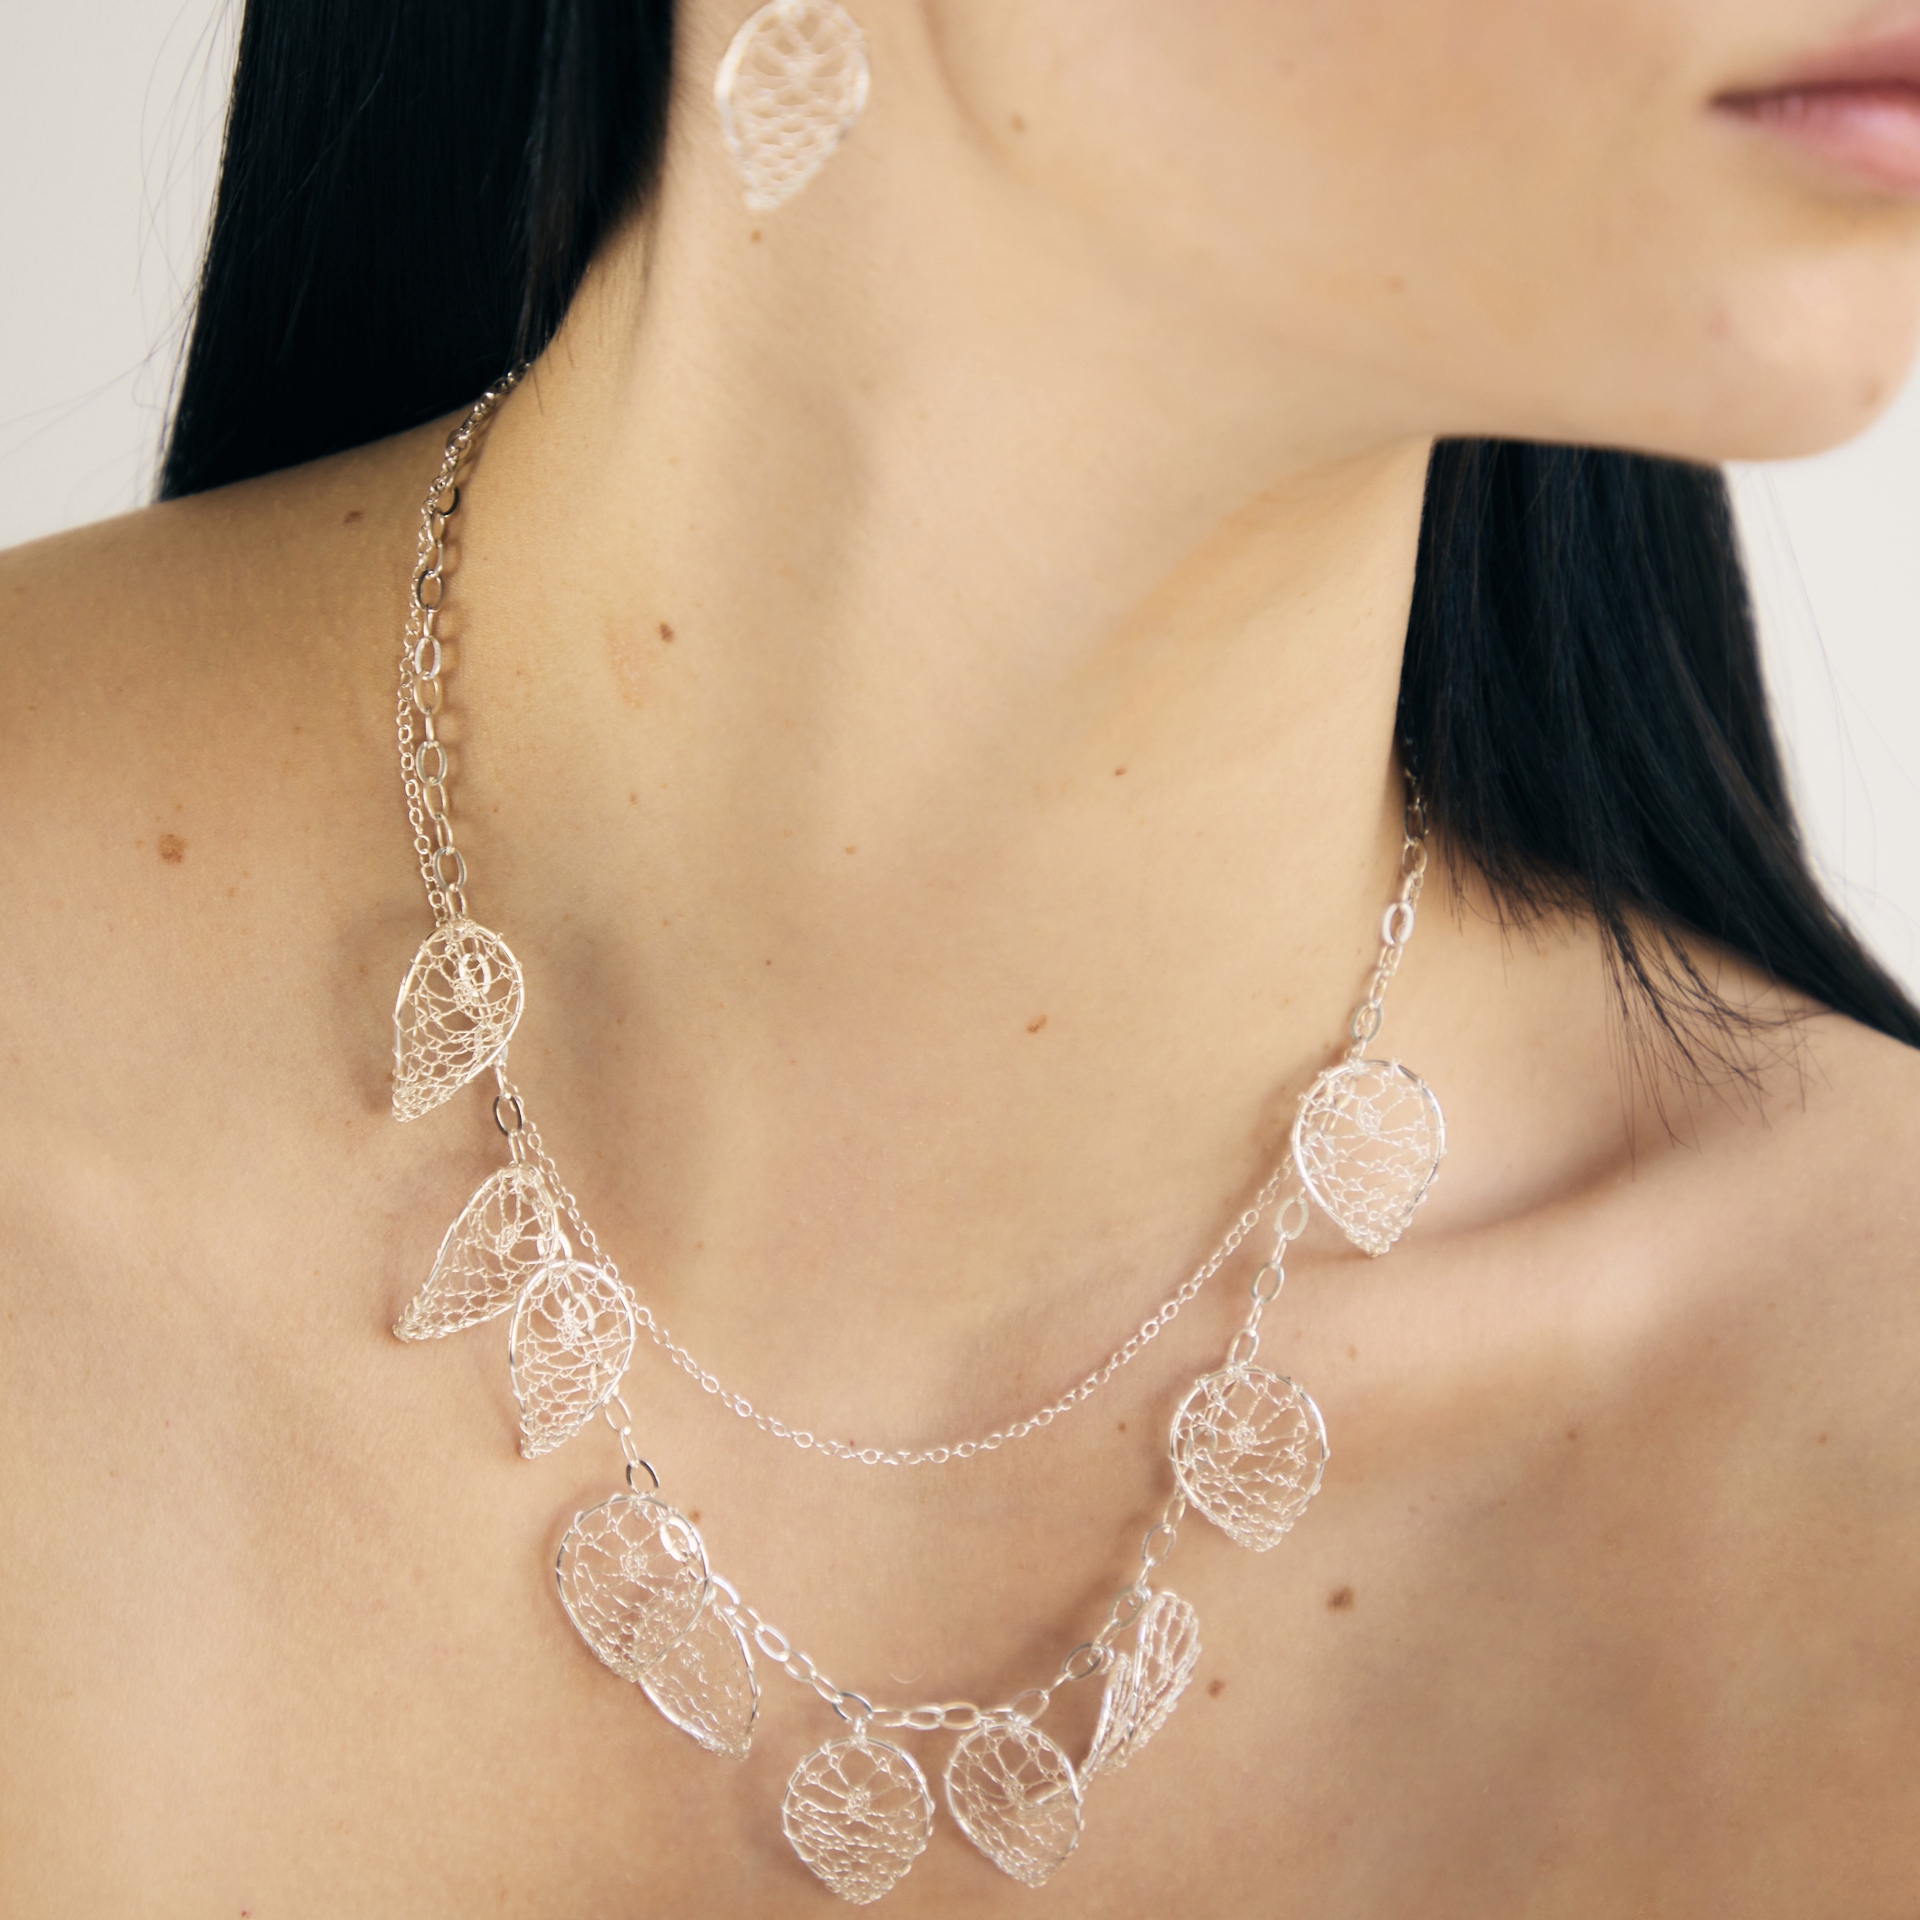 Torchon Lace Falling Leaves Necklace